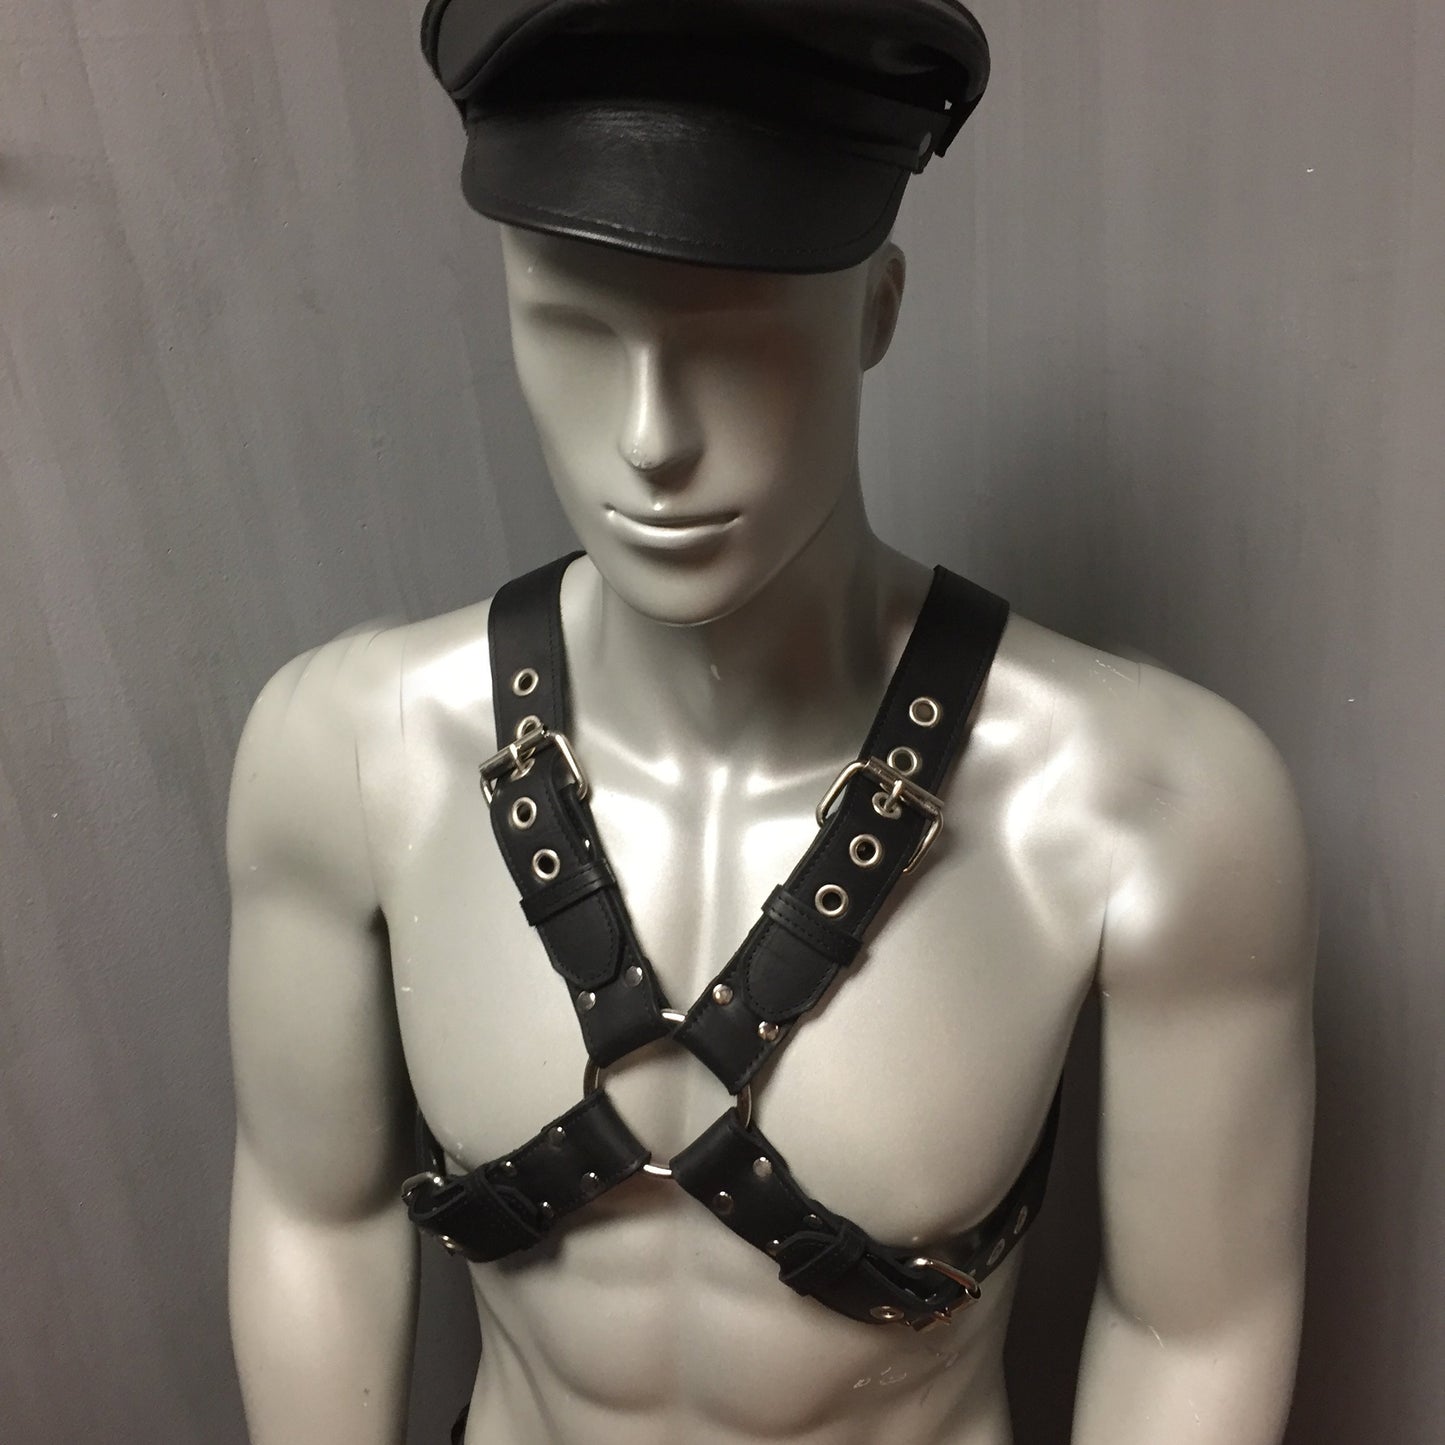 Classic 1.5" Buckle X-Harness on mannequin, front view.